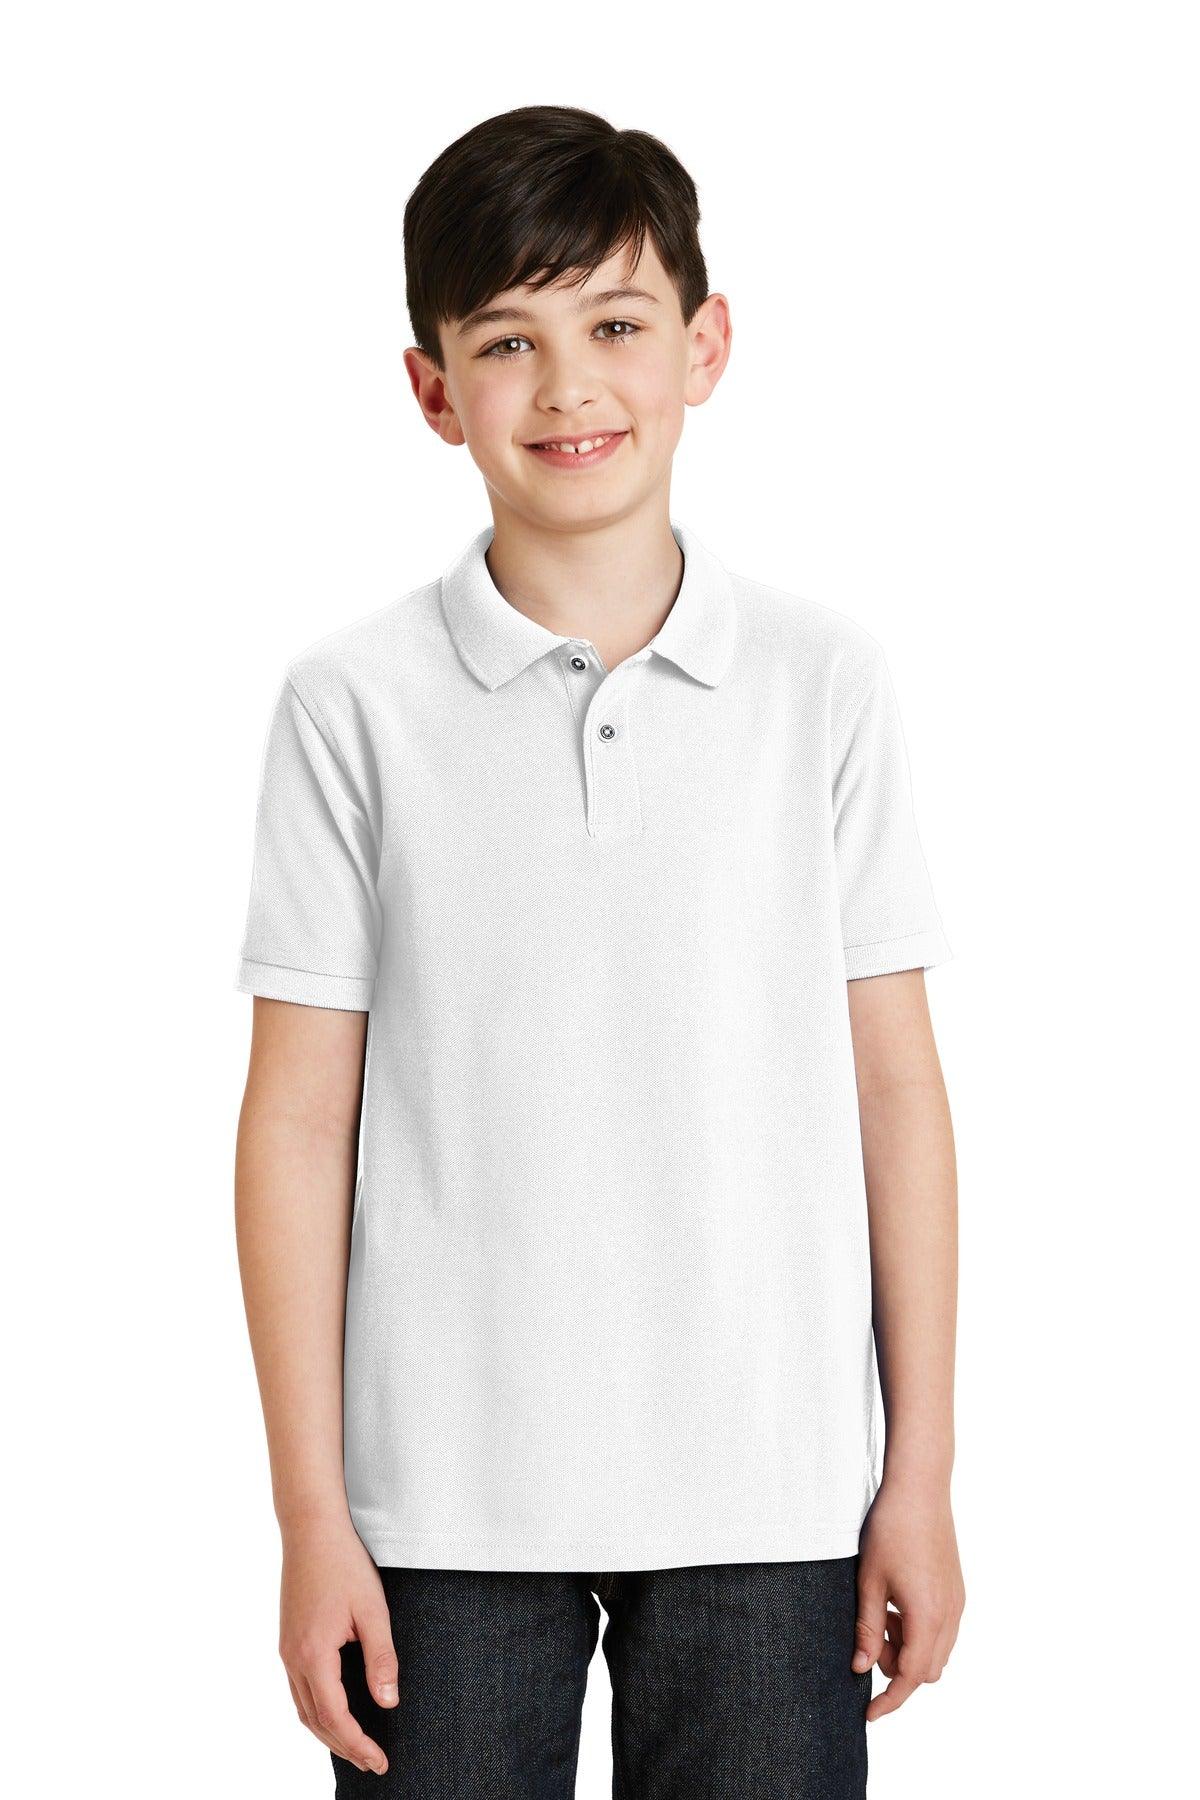 Port Authority Youth Silk Touch Polo. Y500 - Dresses Max